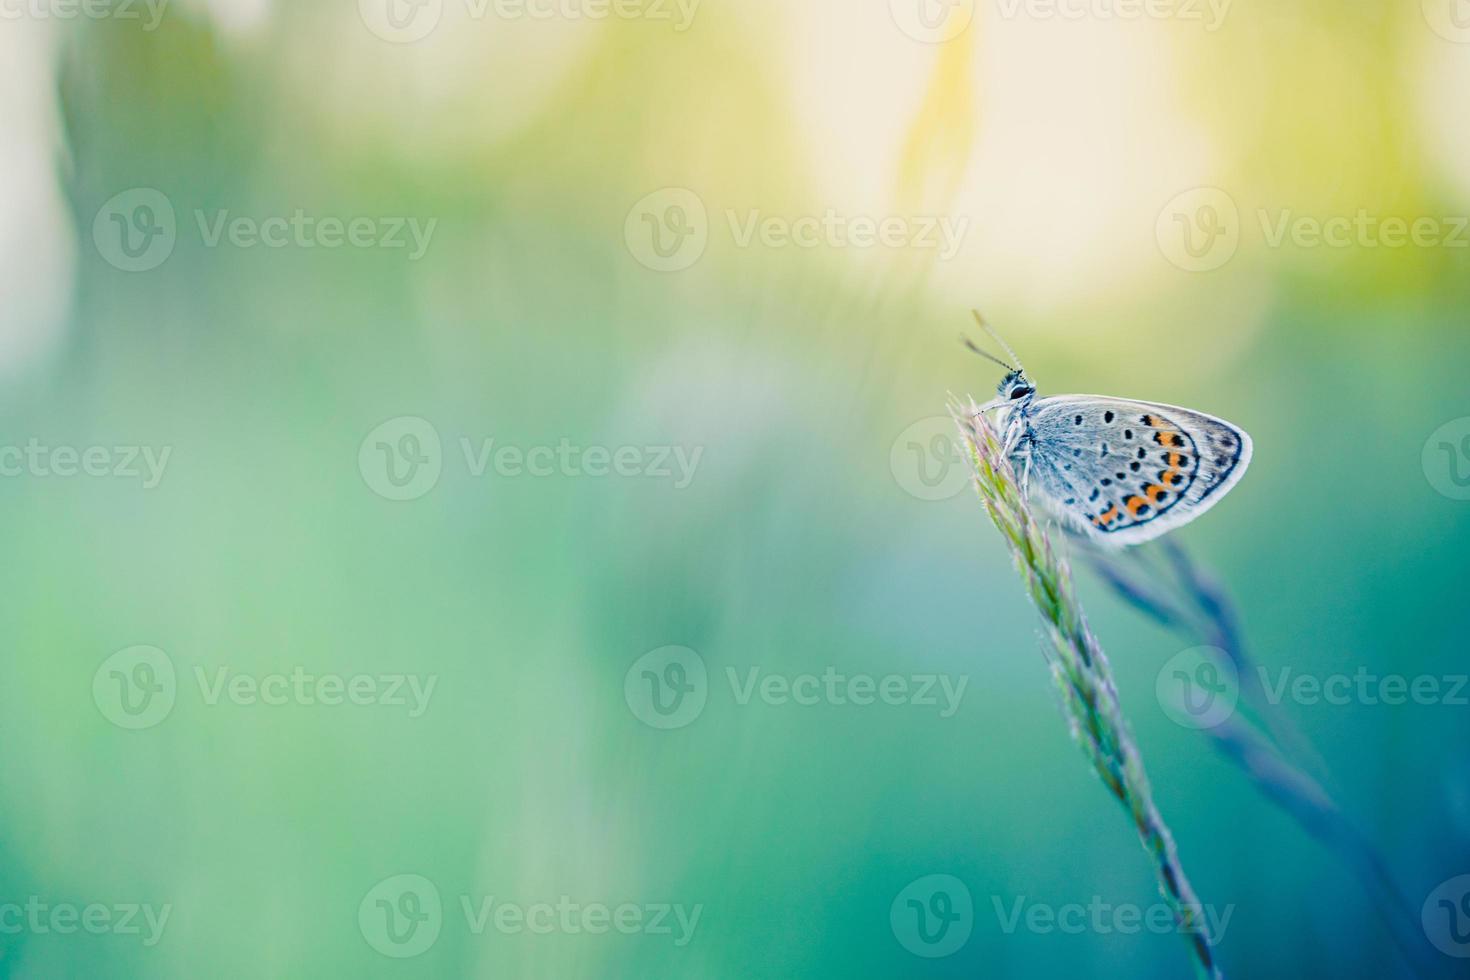 Nature close-up macro background concept. Tranquil, calming summer meadow and butterfly on dreamy soft pastel colorful background. Inspirational nature scenic. photo